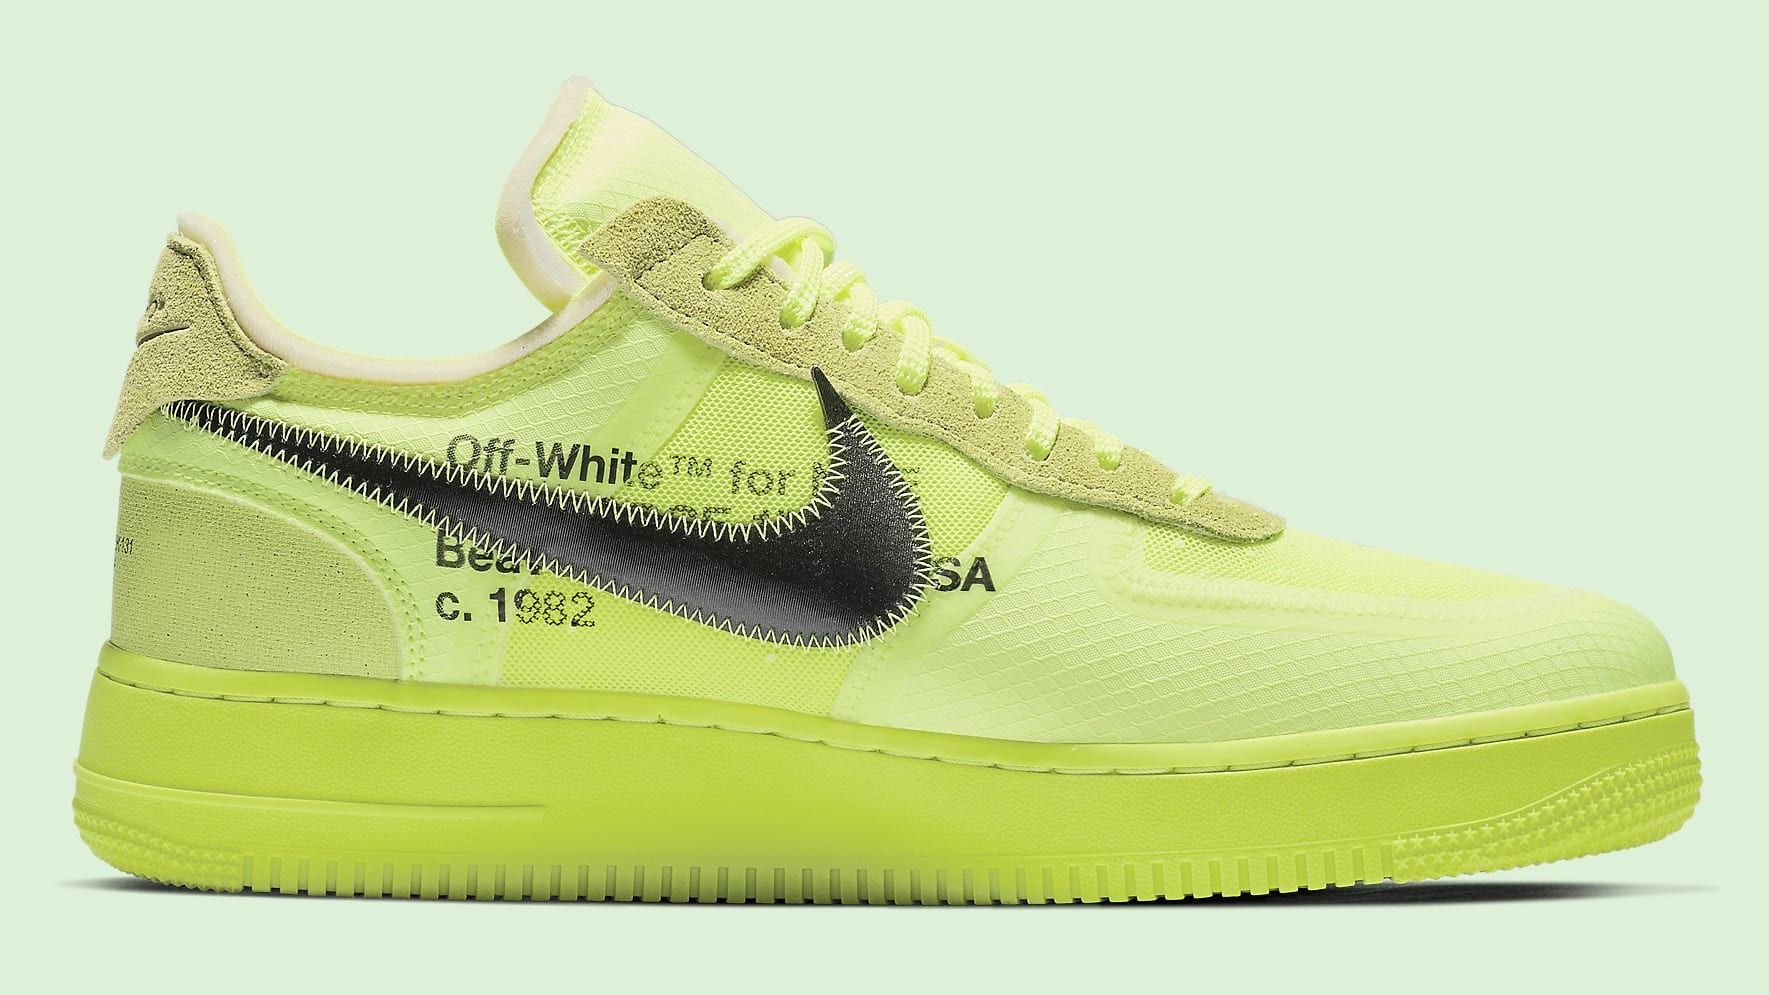 Off-White x Nike Air Force 1 Volt Release Date AO4606-700 Medial